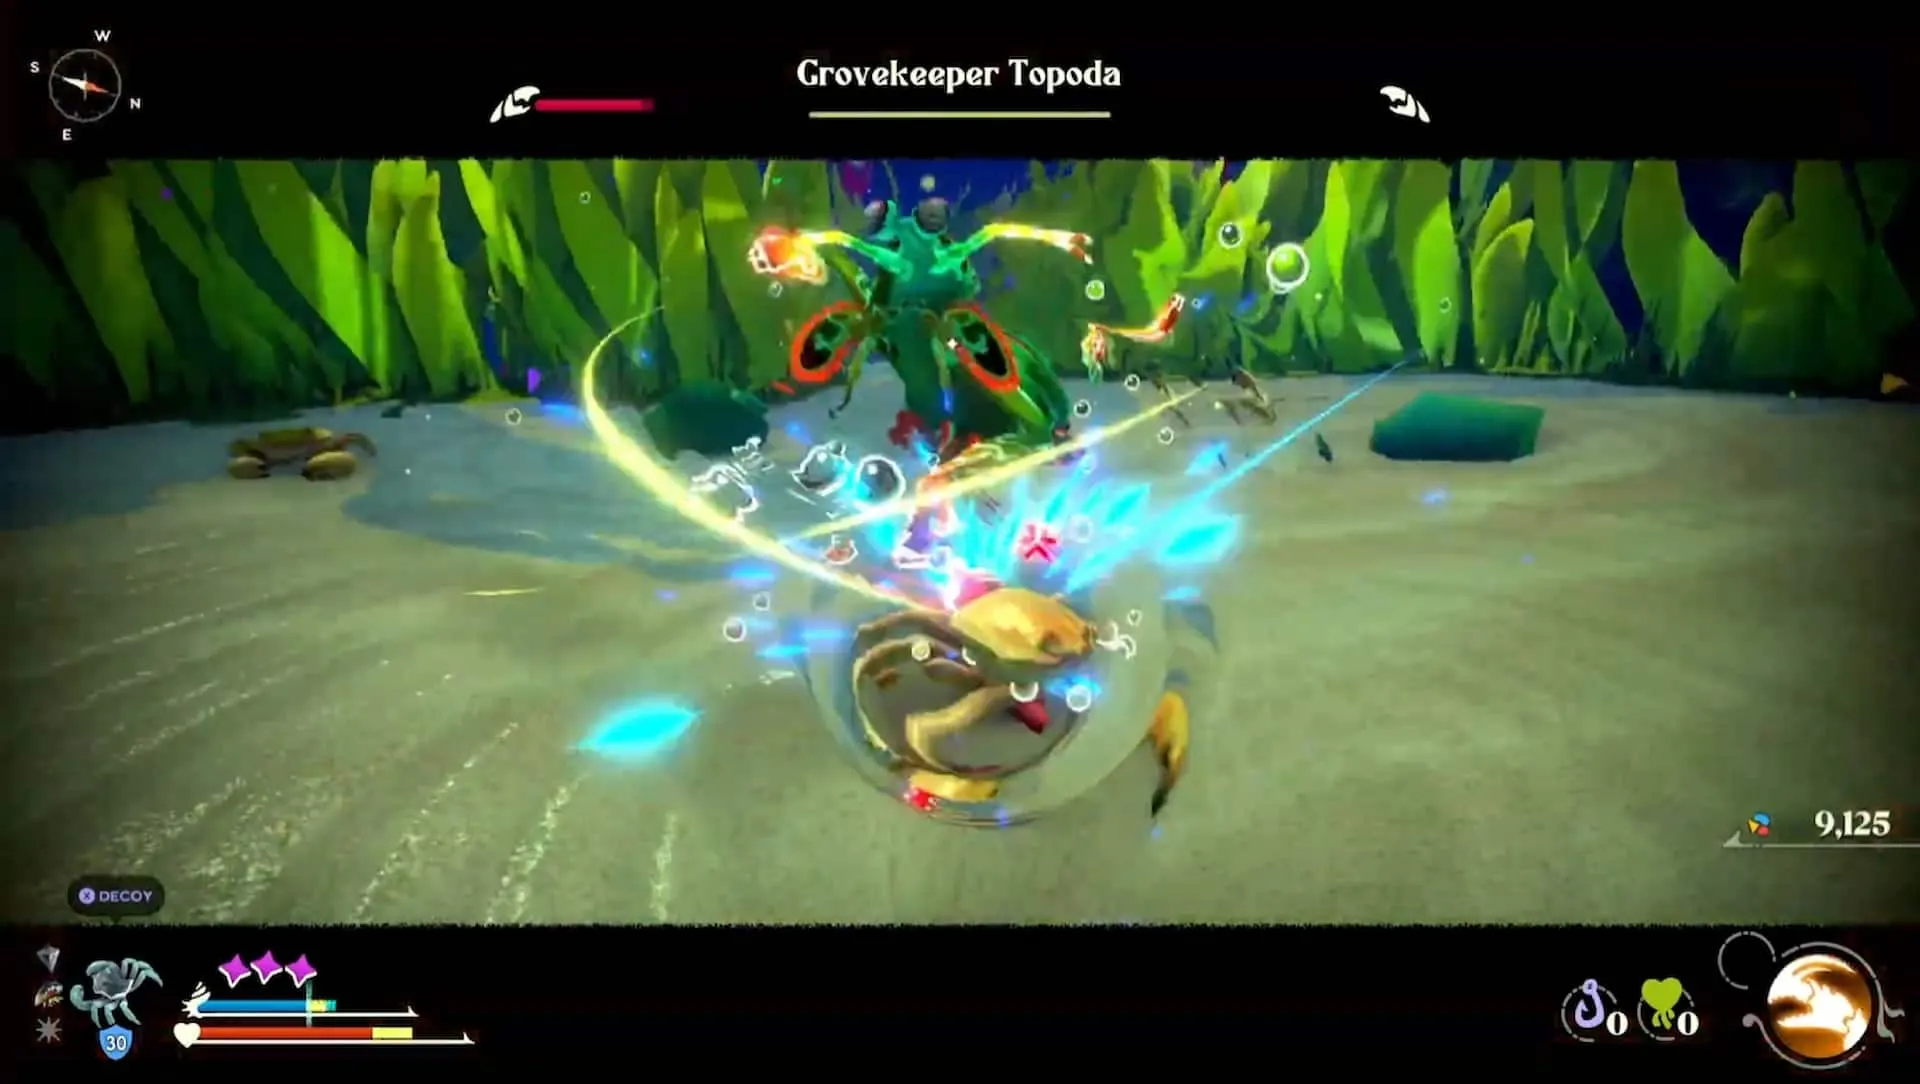 Topoda uses his fast reflexes to gain an advanatge in fights.